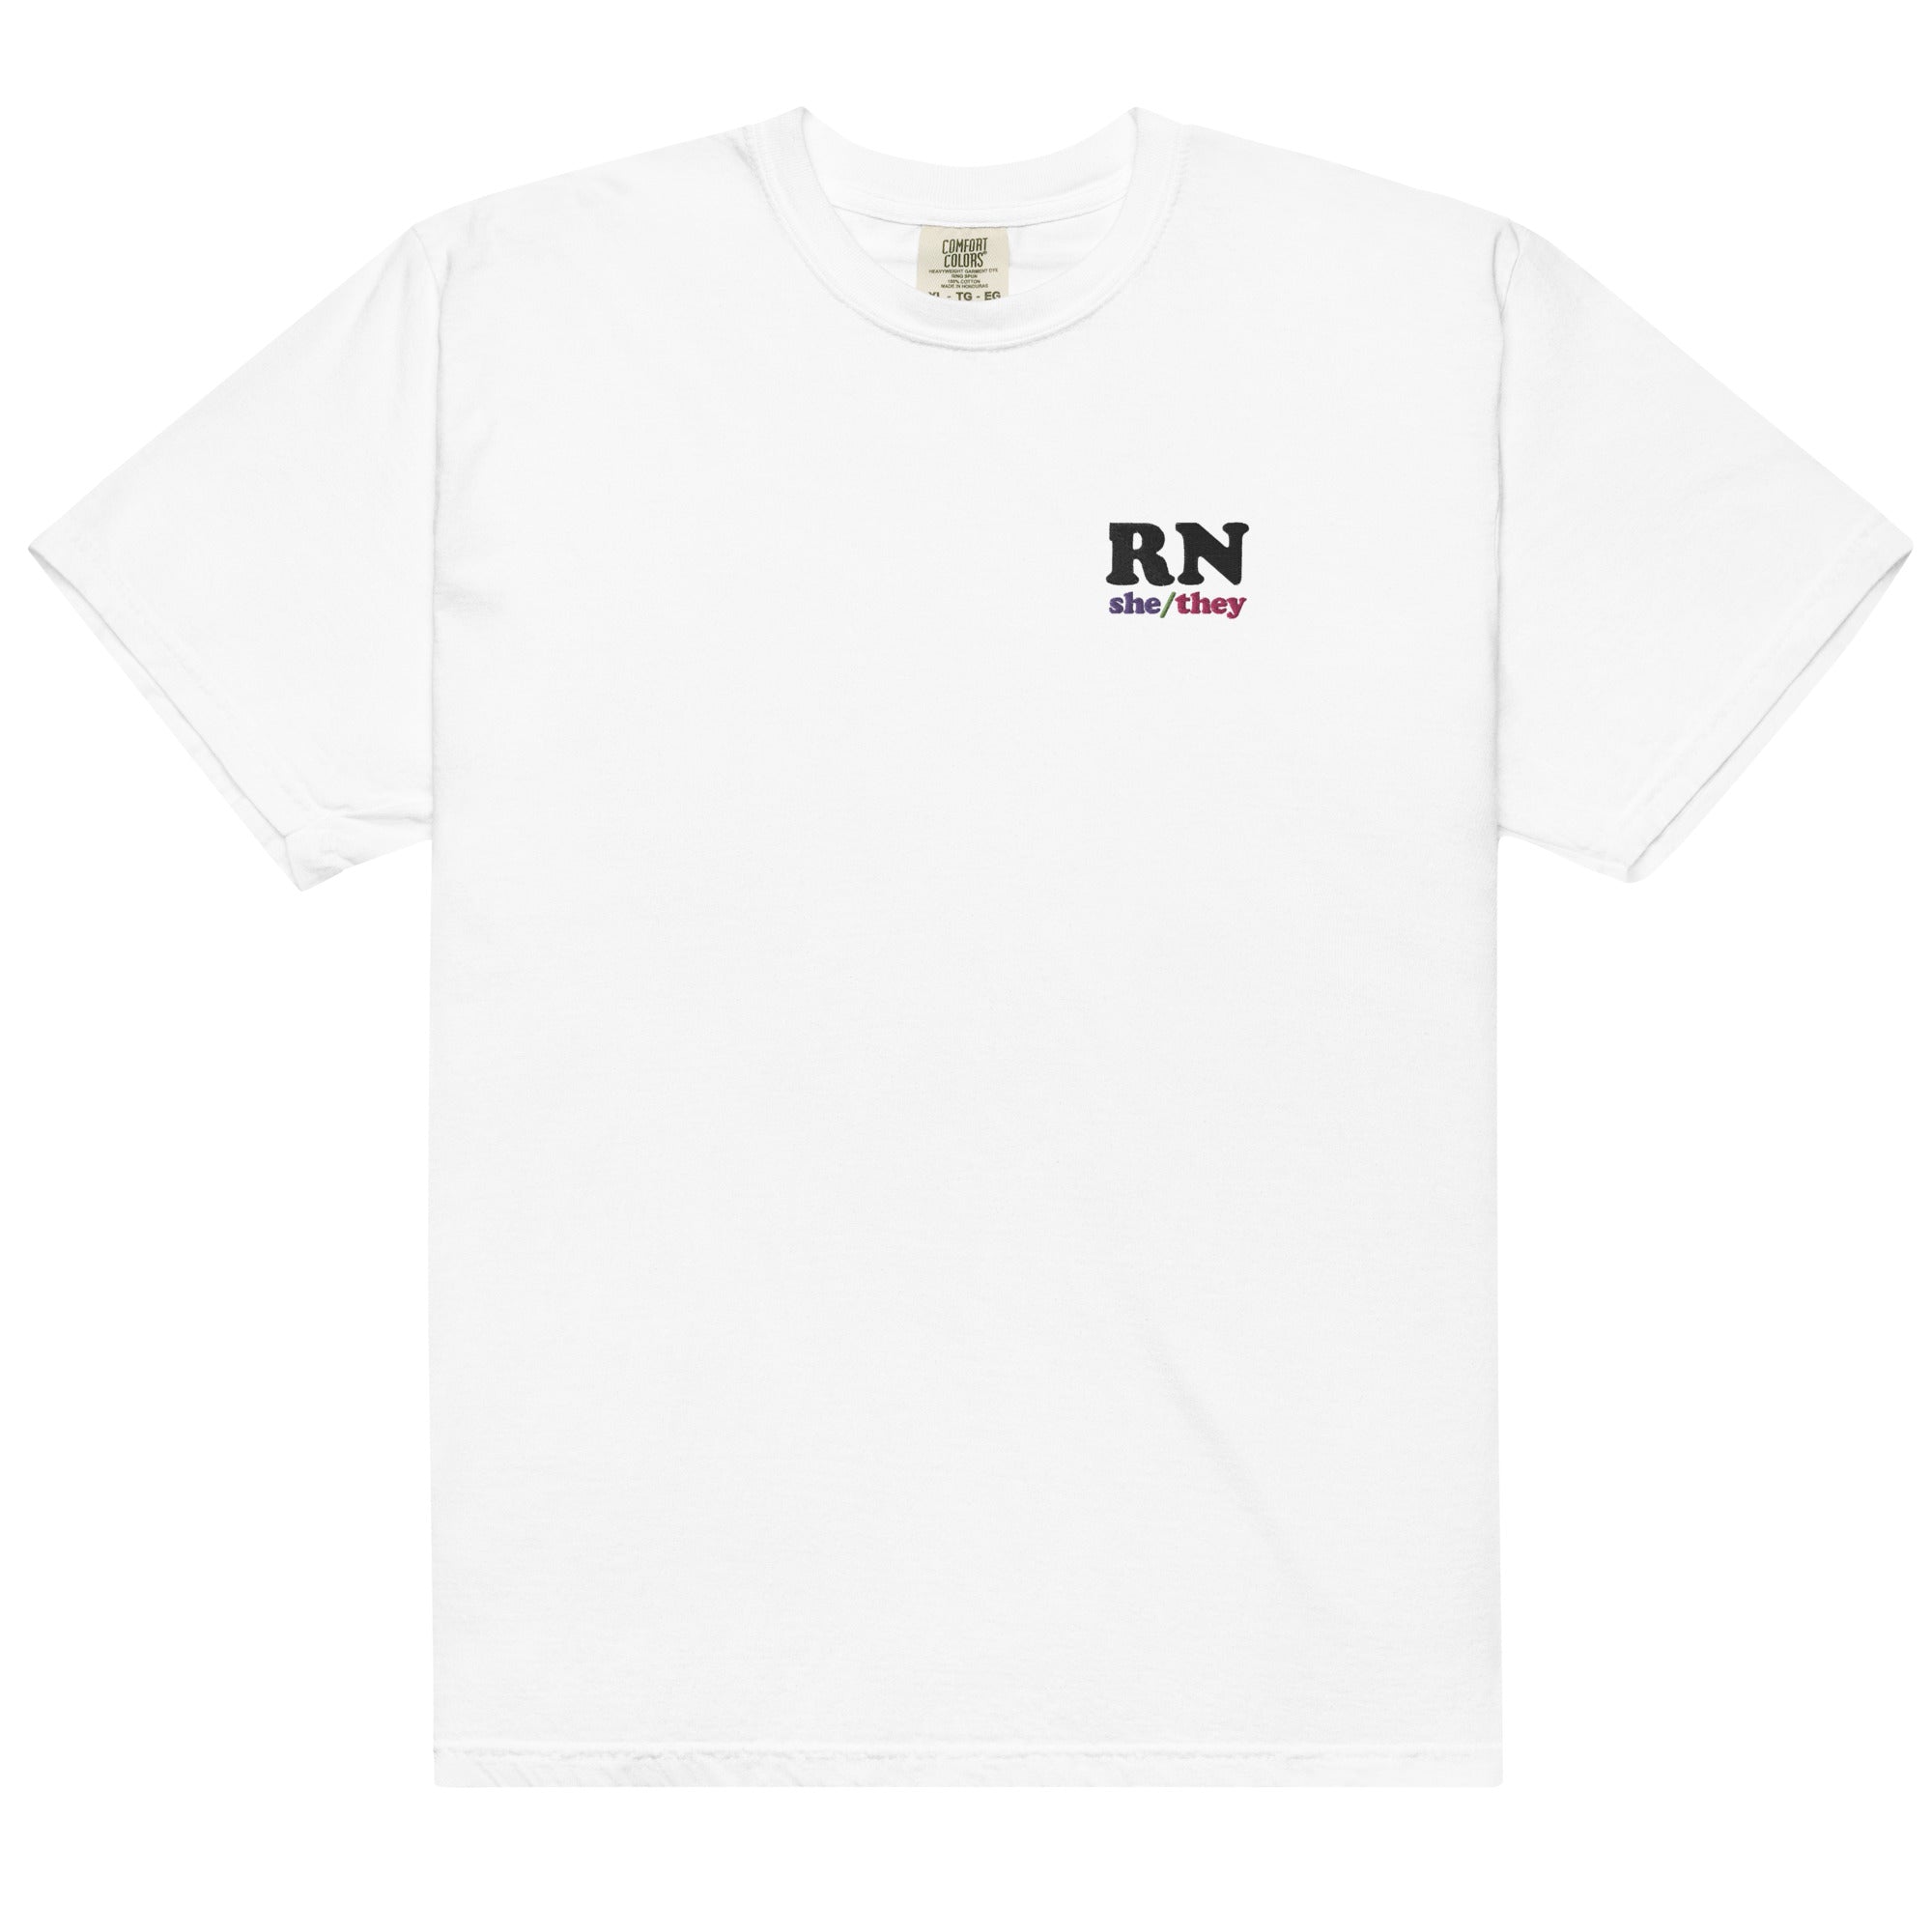 RN (she/they) Embroidered Colorful Tee